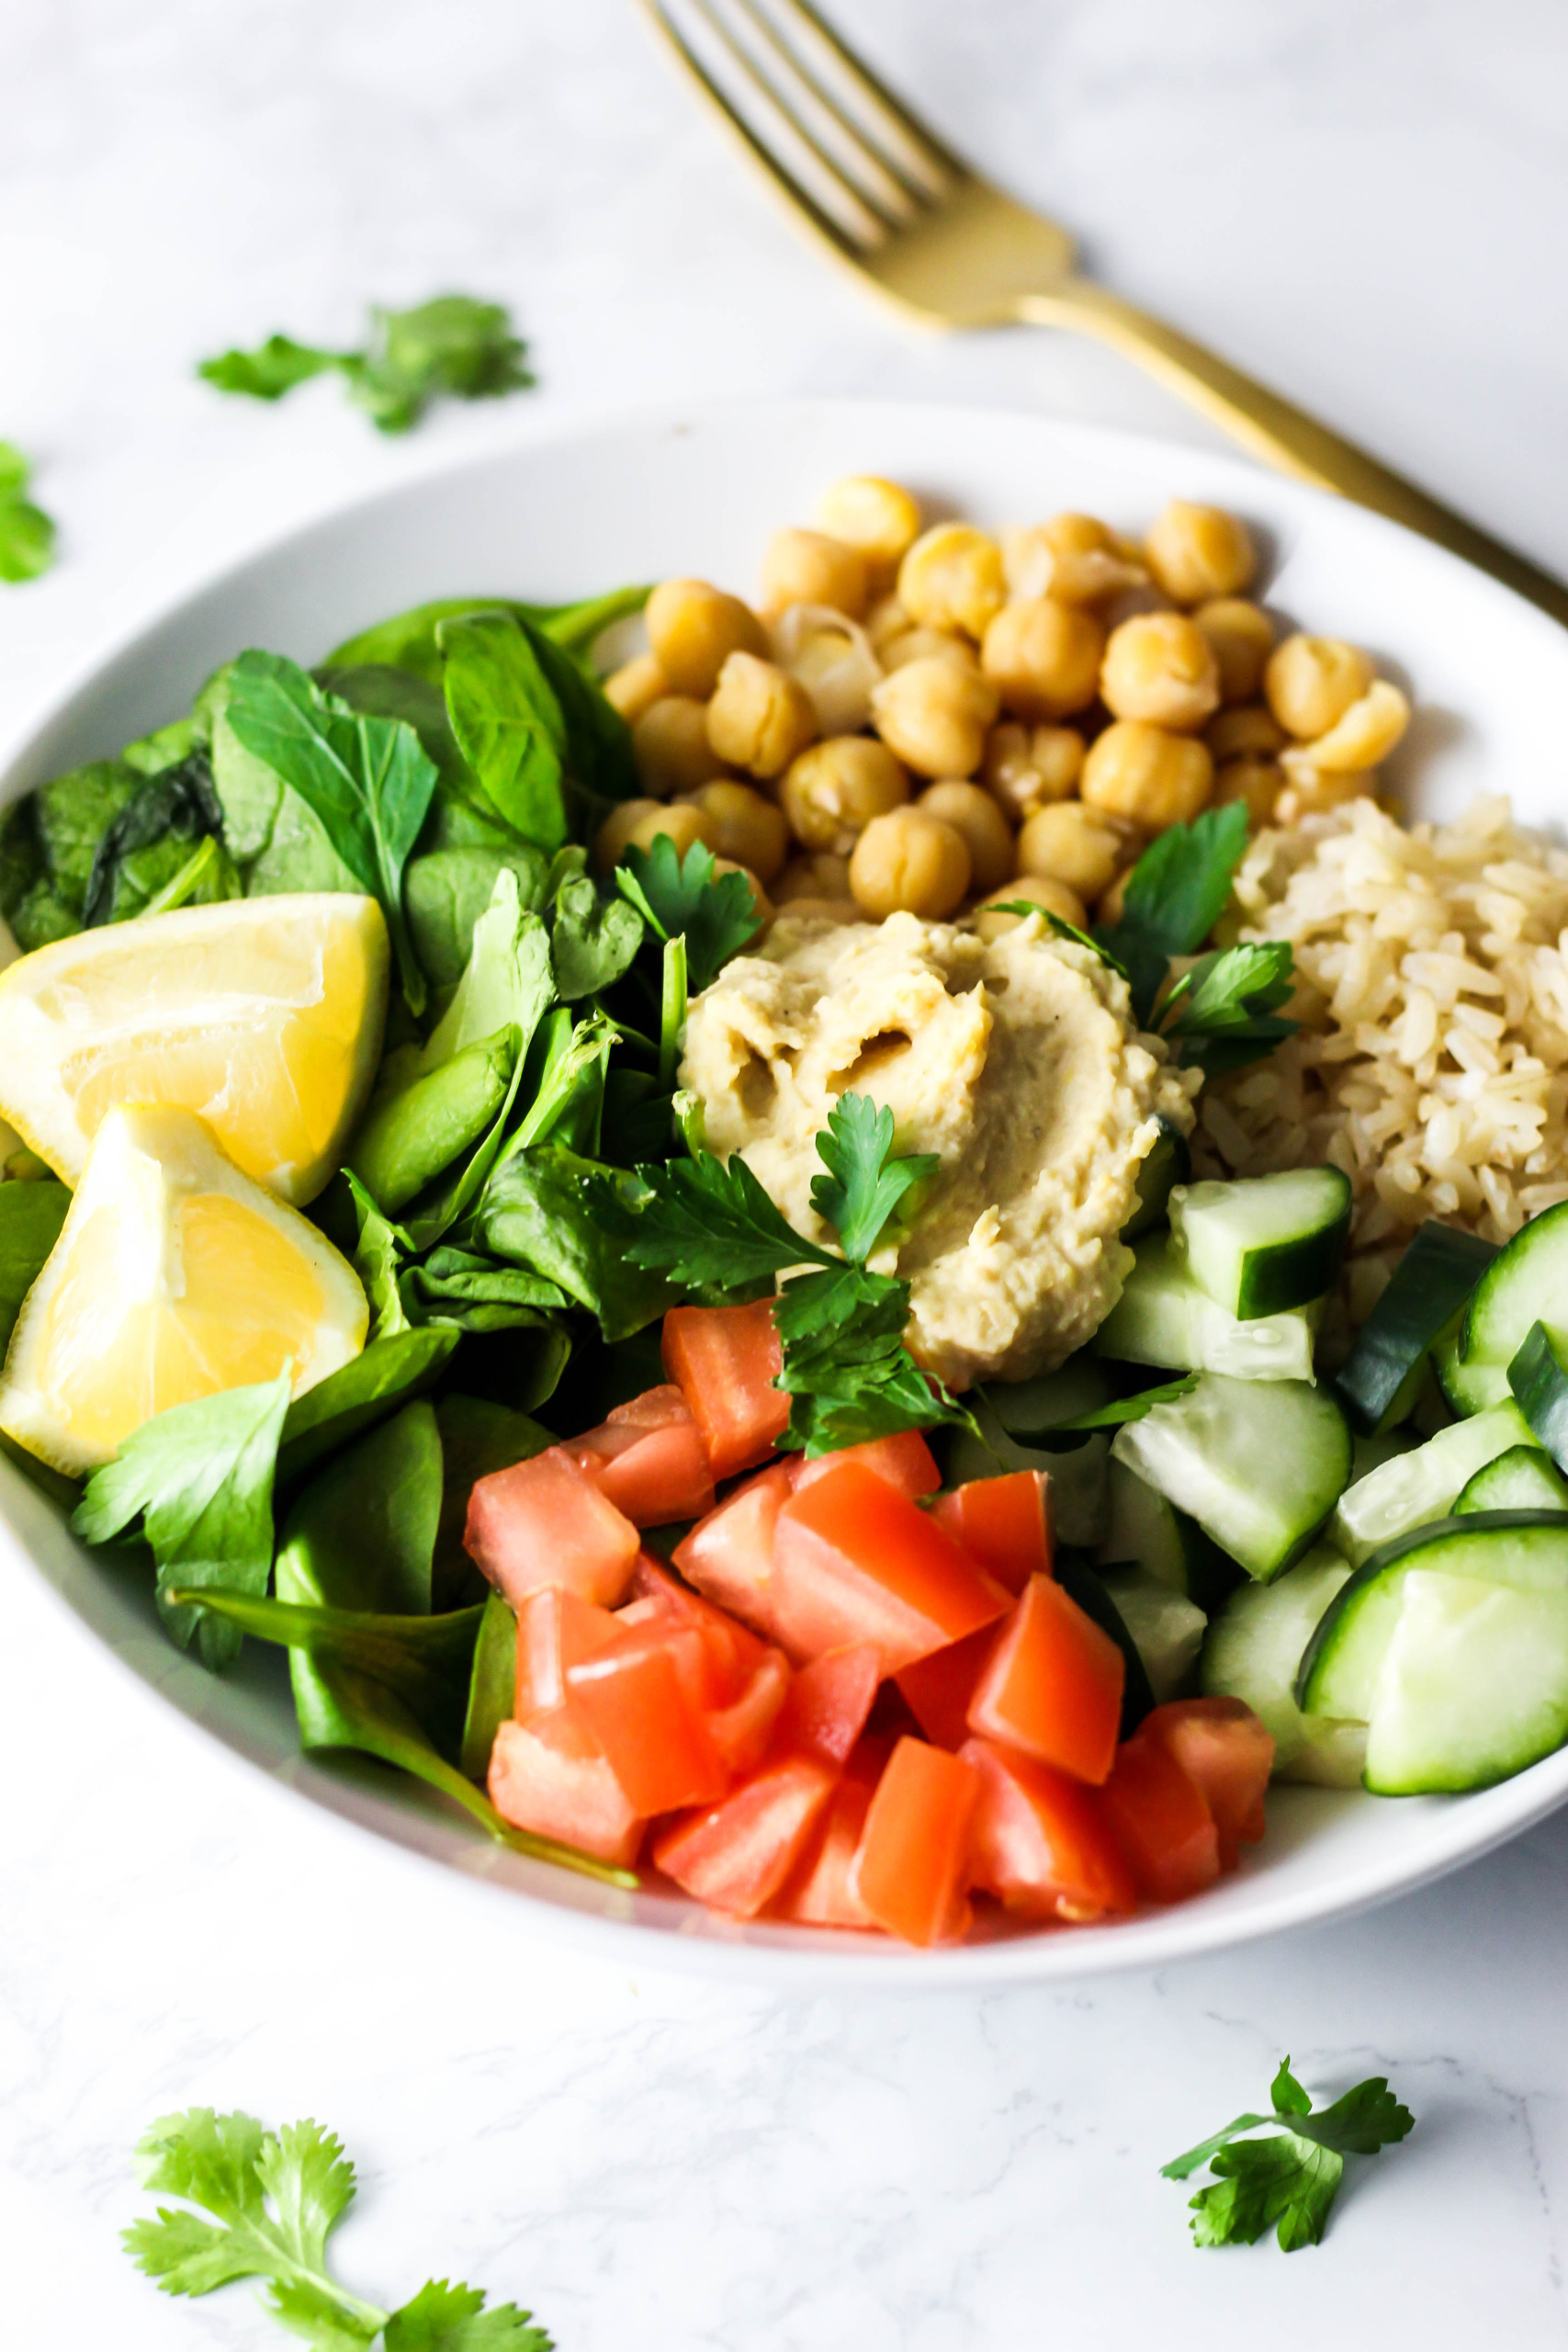 a bowl filled with spinach, brown rice, cucumber, tomatoes, and chickpeas topped off with hummus, parsley and a lemon wedge